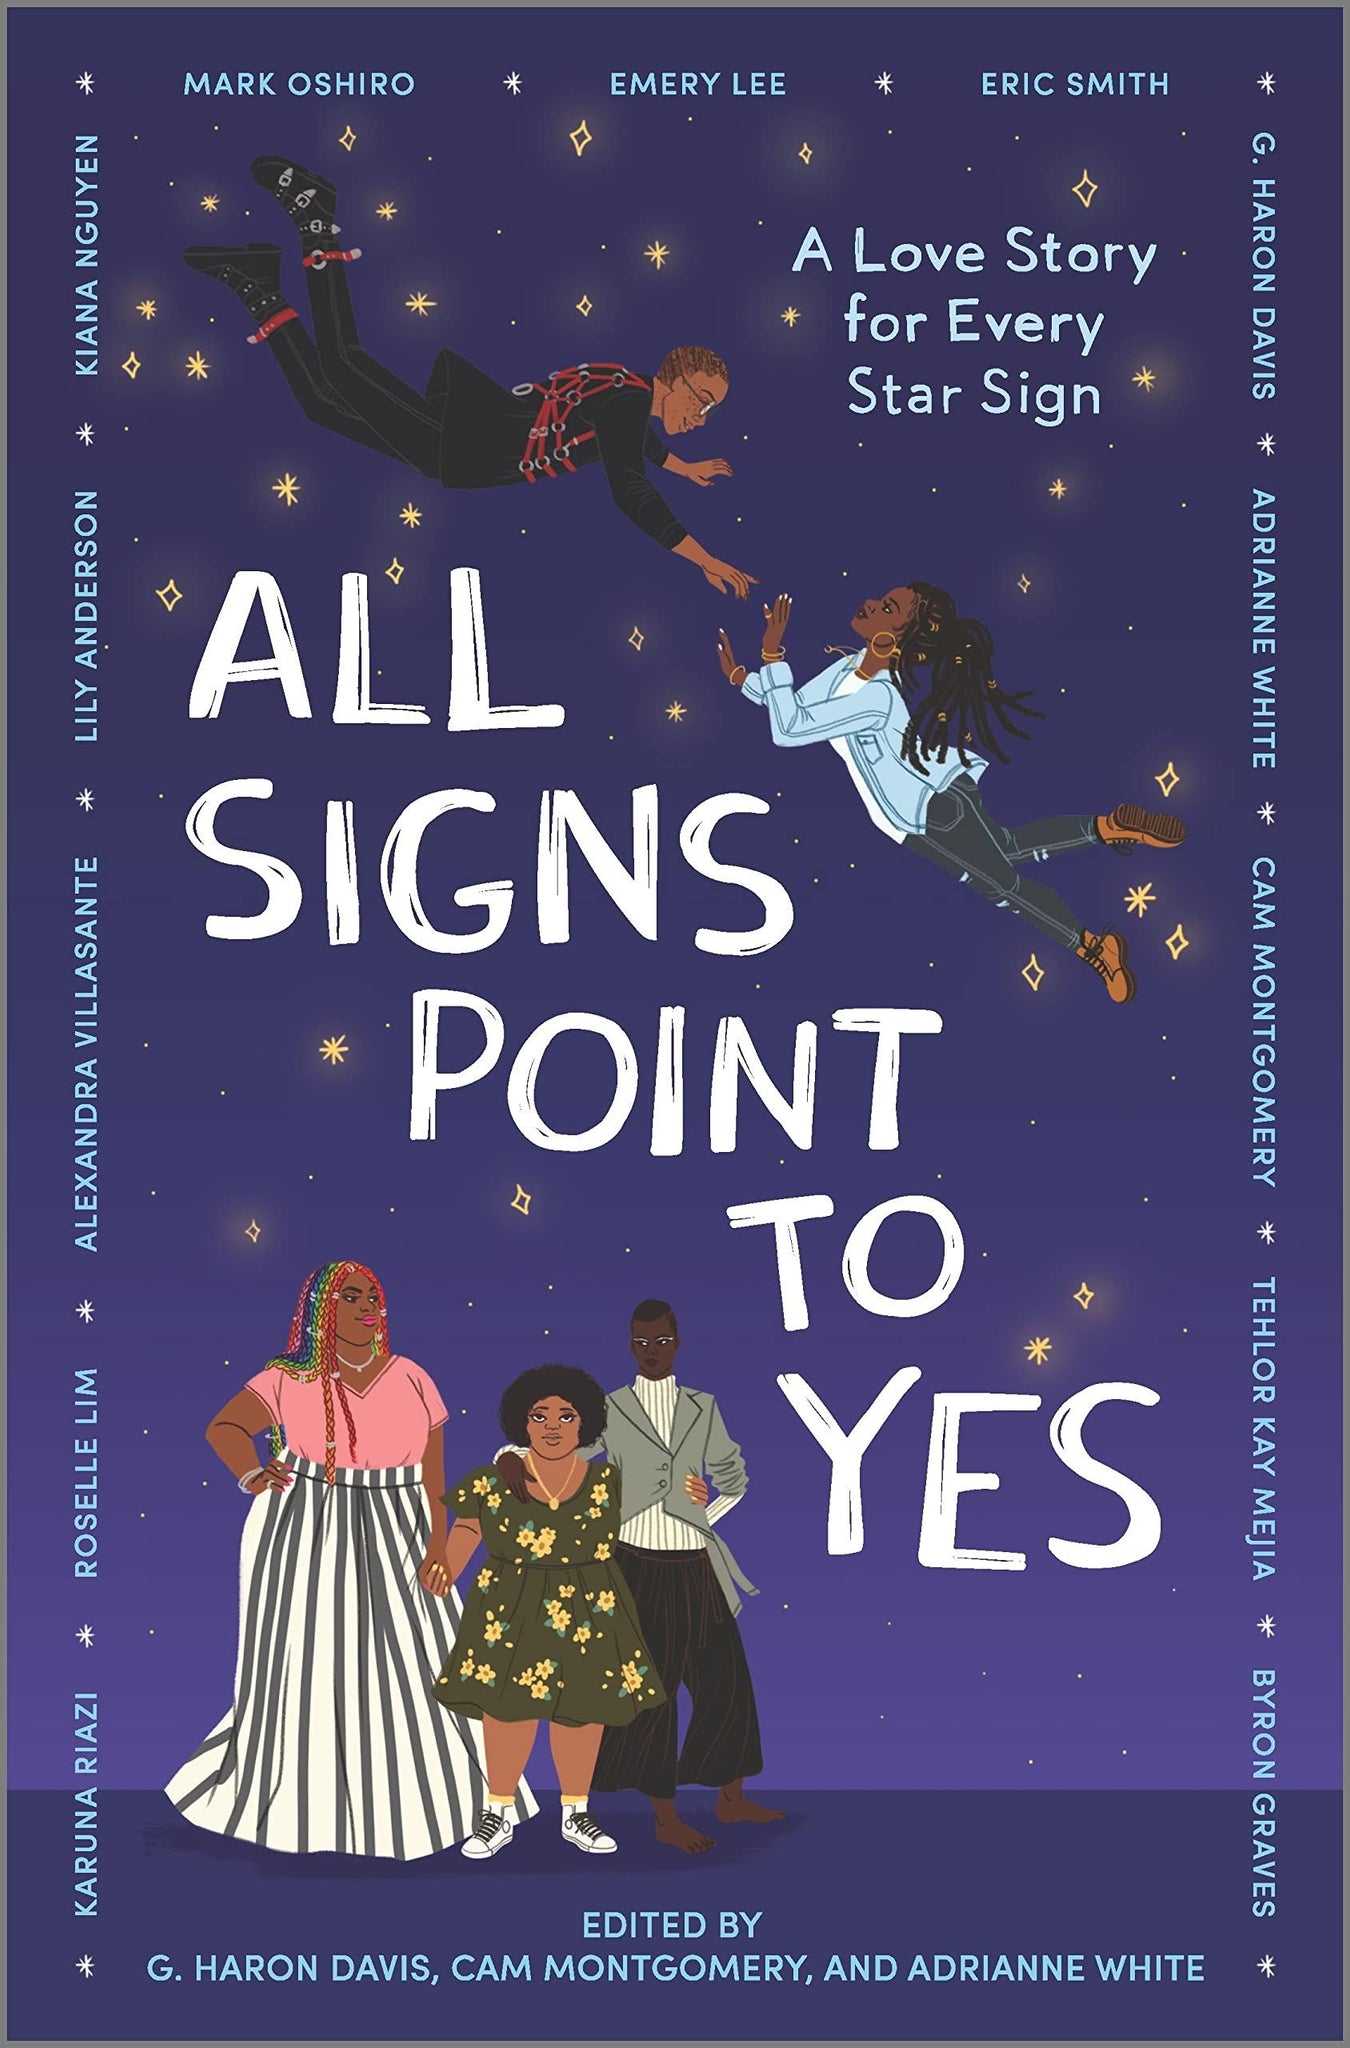 All Signs Point to Yes (Original) - ShopQueer.co